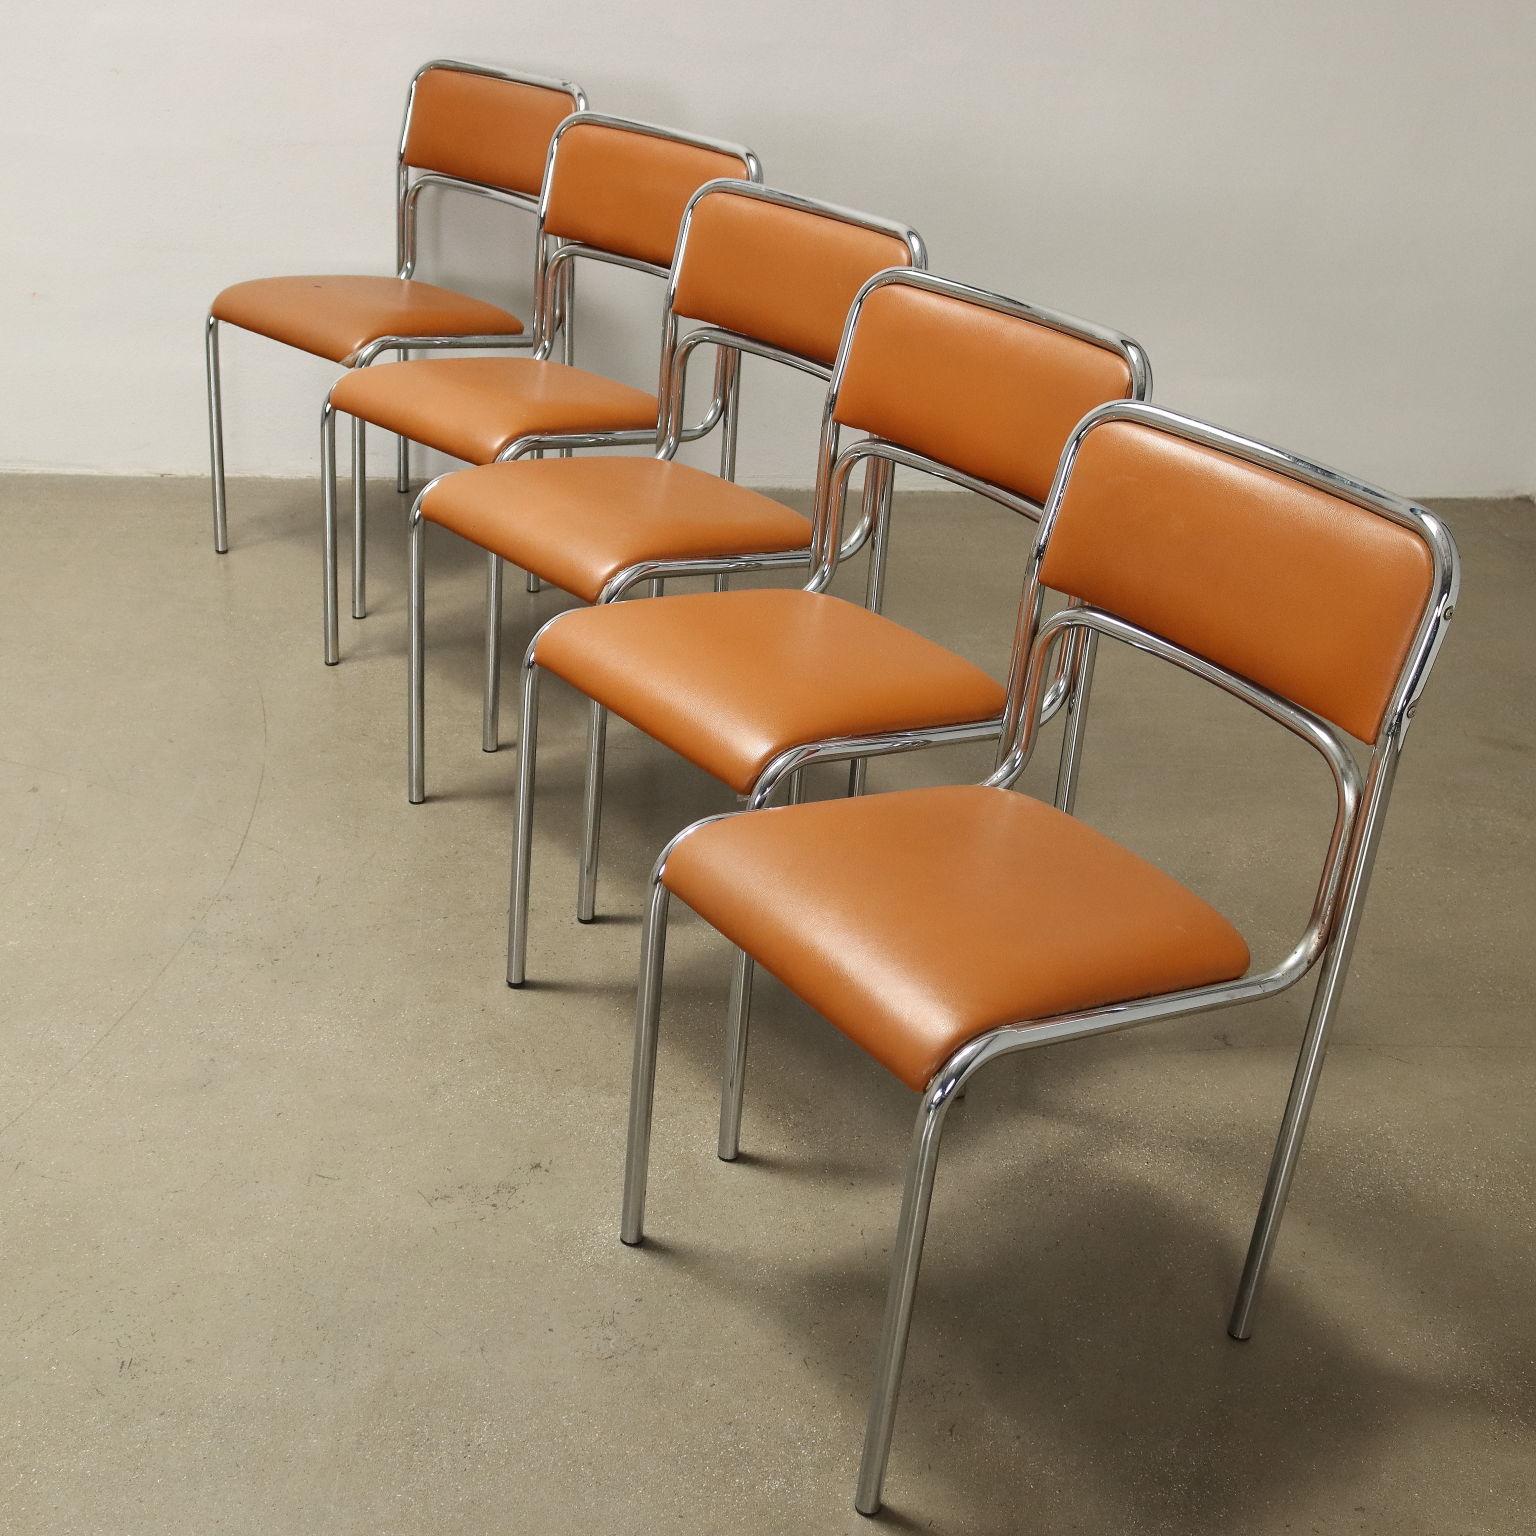 Italian Group of 11 Chairs Leatherette Italy, 1970s